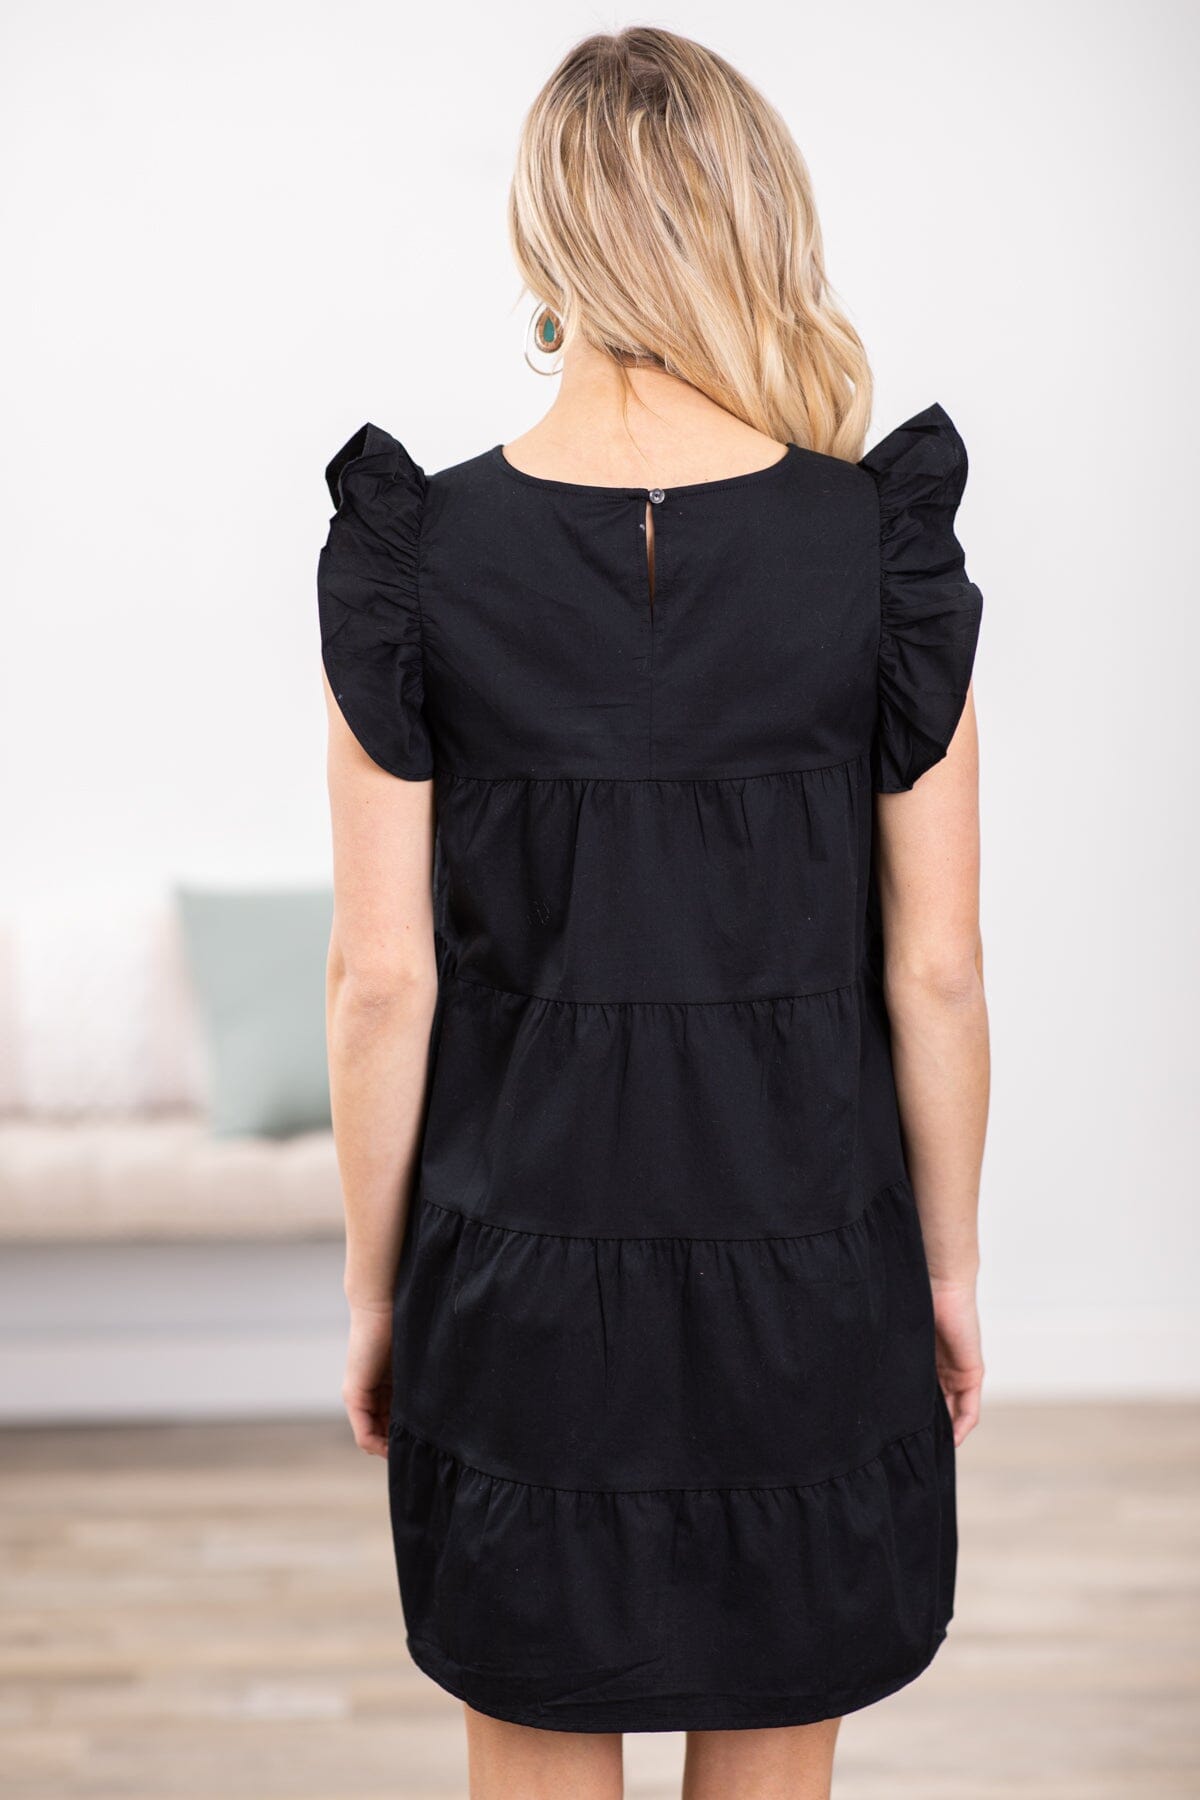 Black Tiered Ruffle Sleeve Dress - Filly Flair